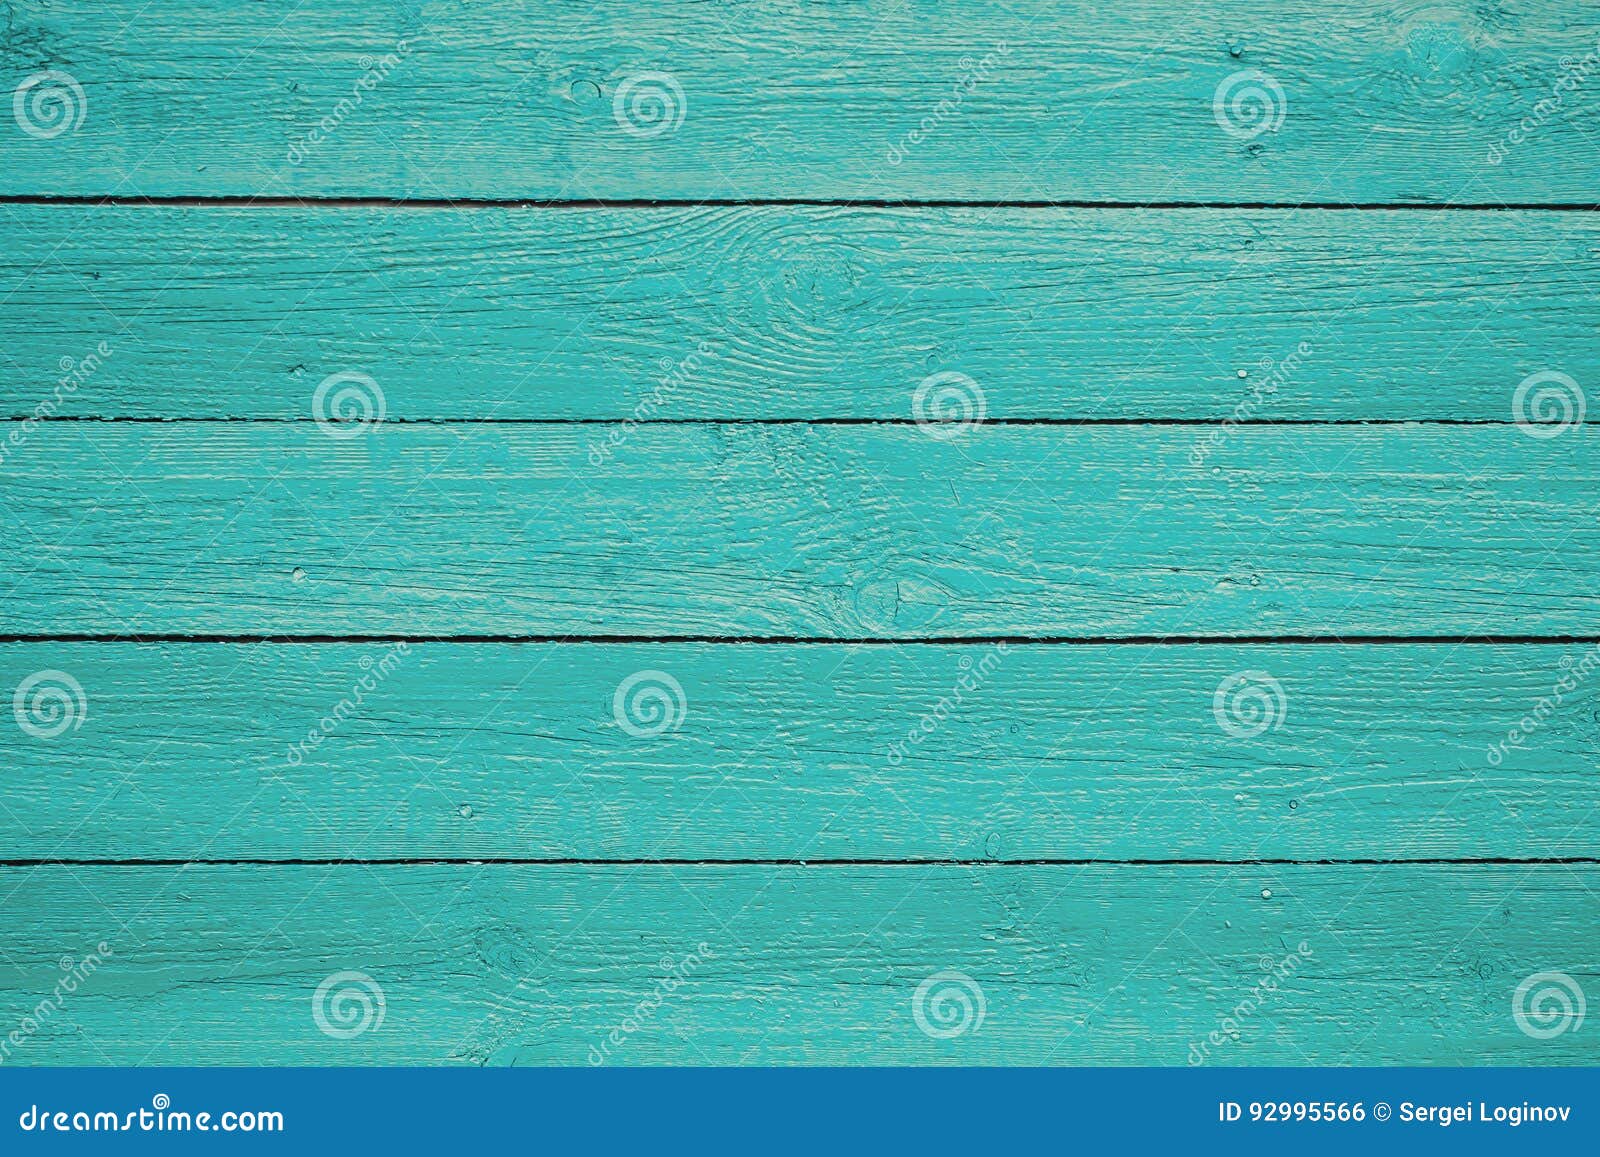 blue painted wooden planks background texture.